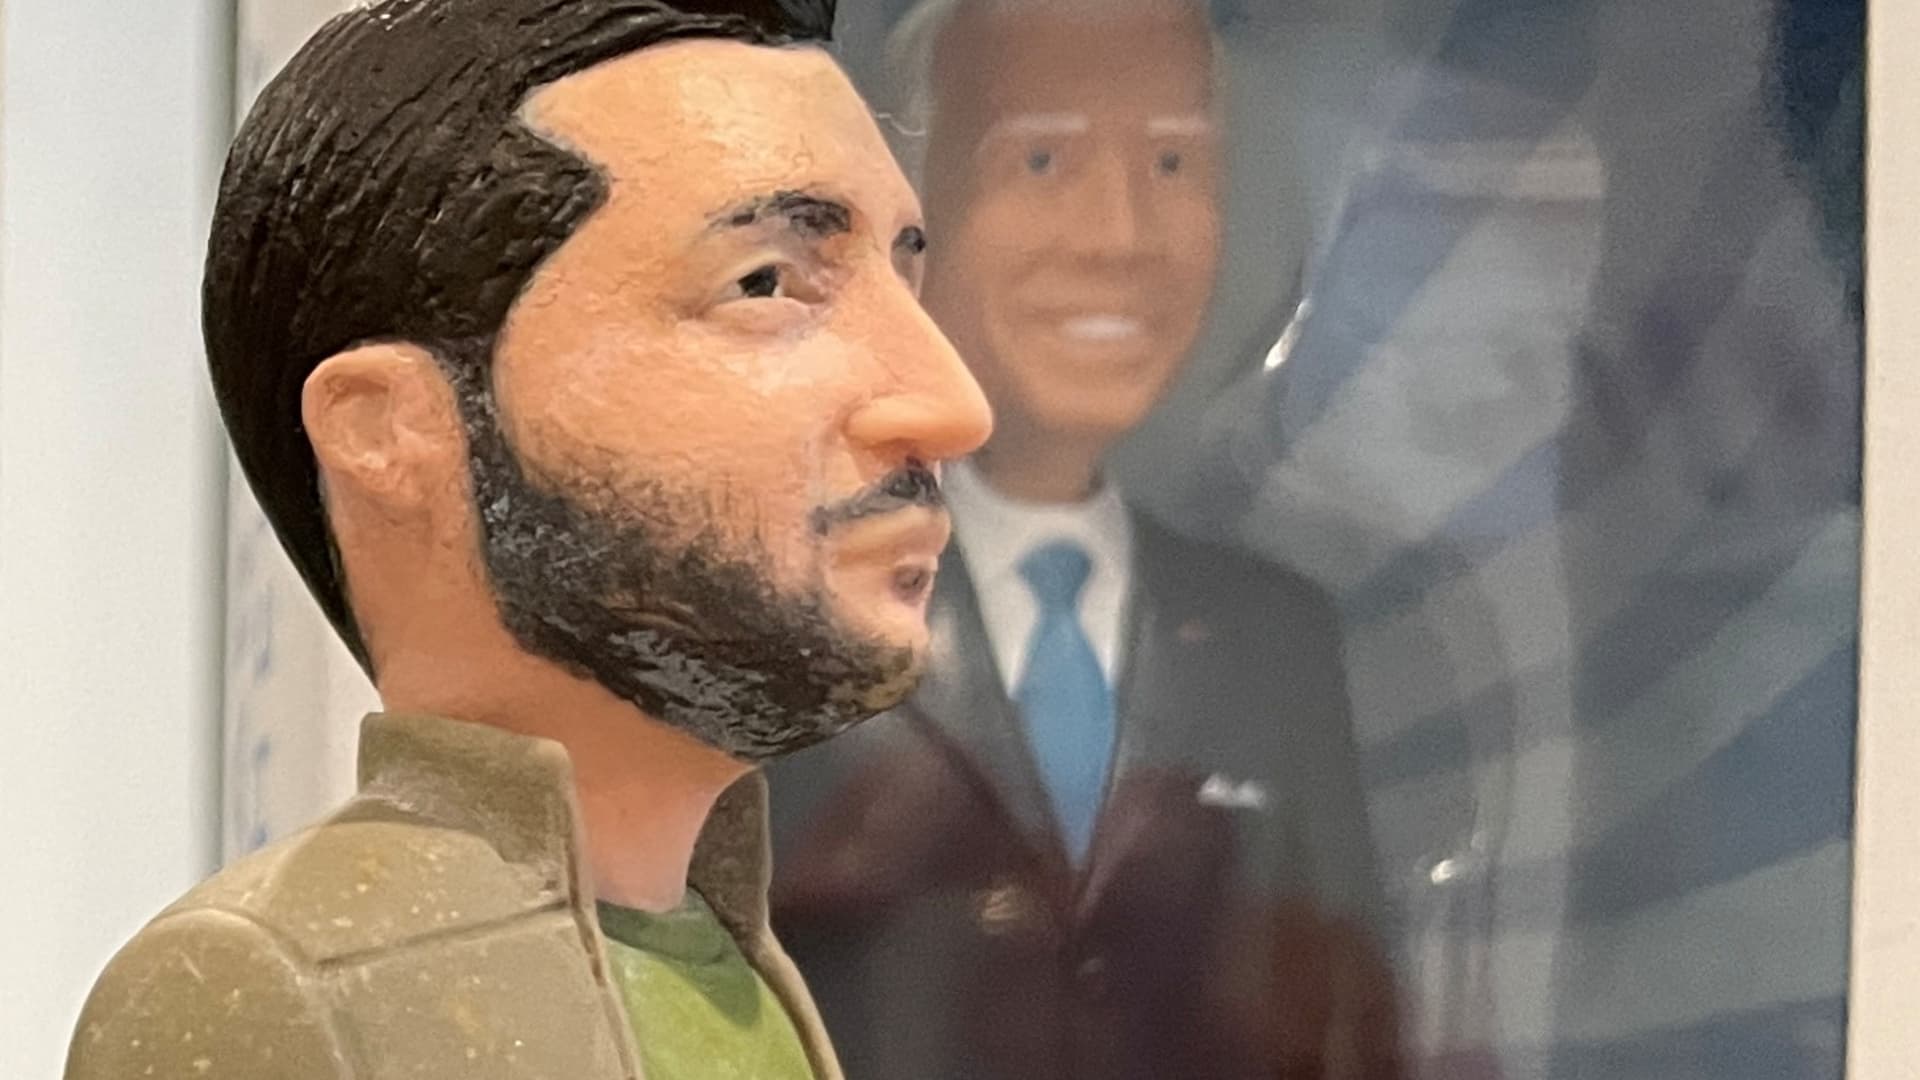 A prototype of the Zelenskyy action figure in Brooklyn, NY, August 9, 2022.